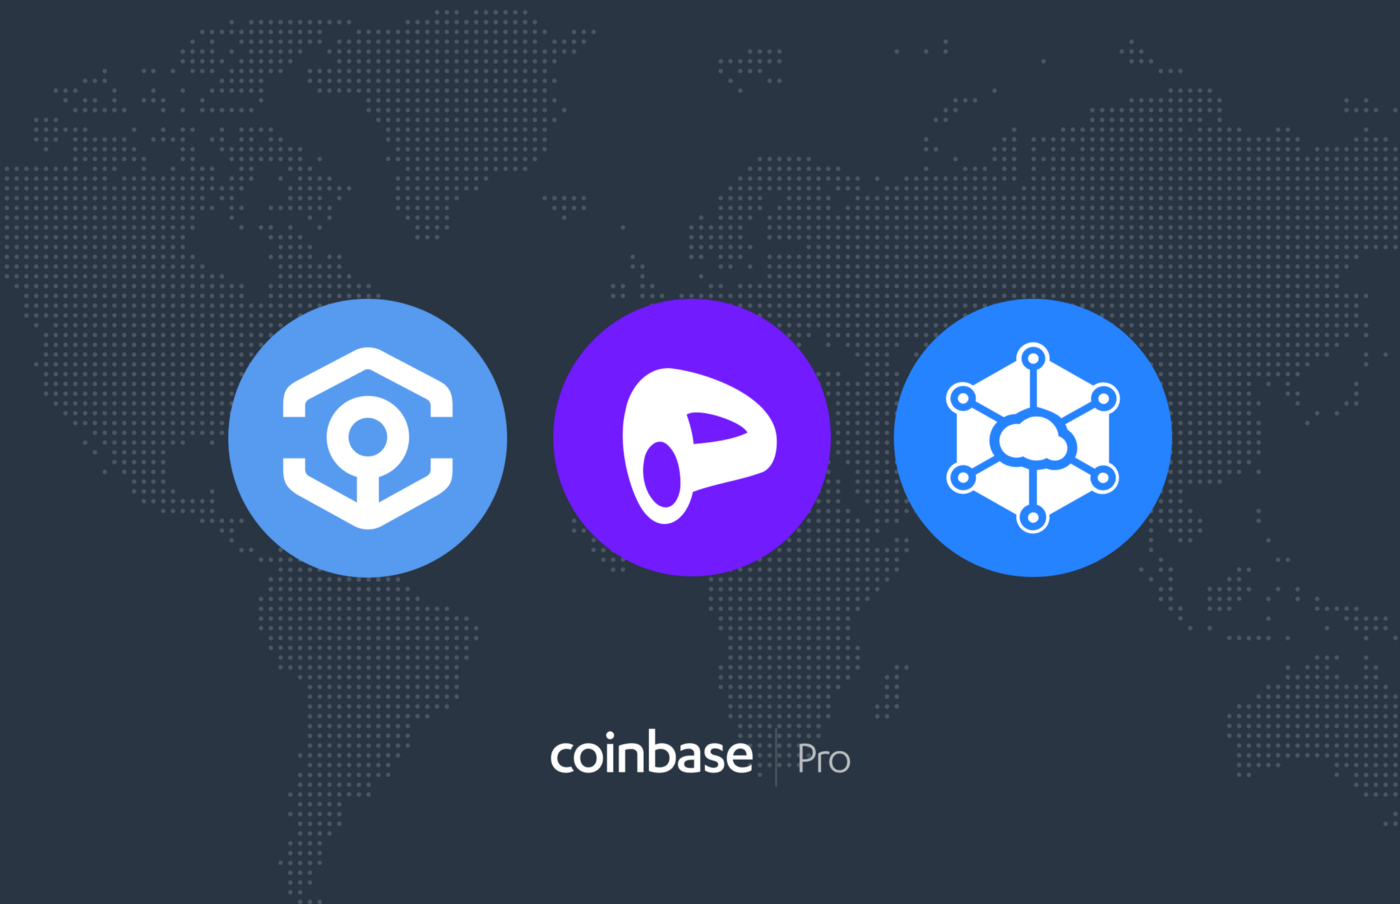 Ankr (ANKR) Curve DAO Token (CRV) and Storj (STORJ) are launching on Coinbase Pro